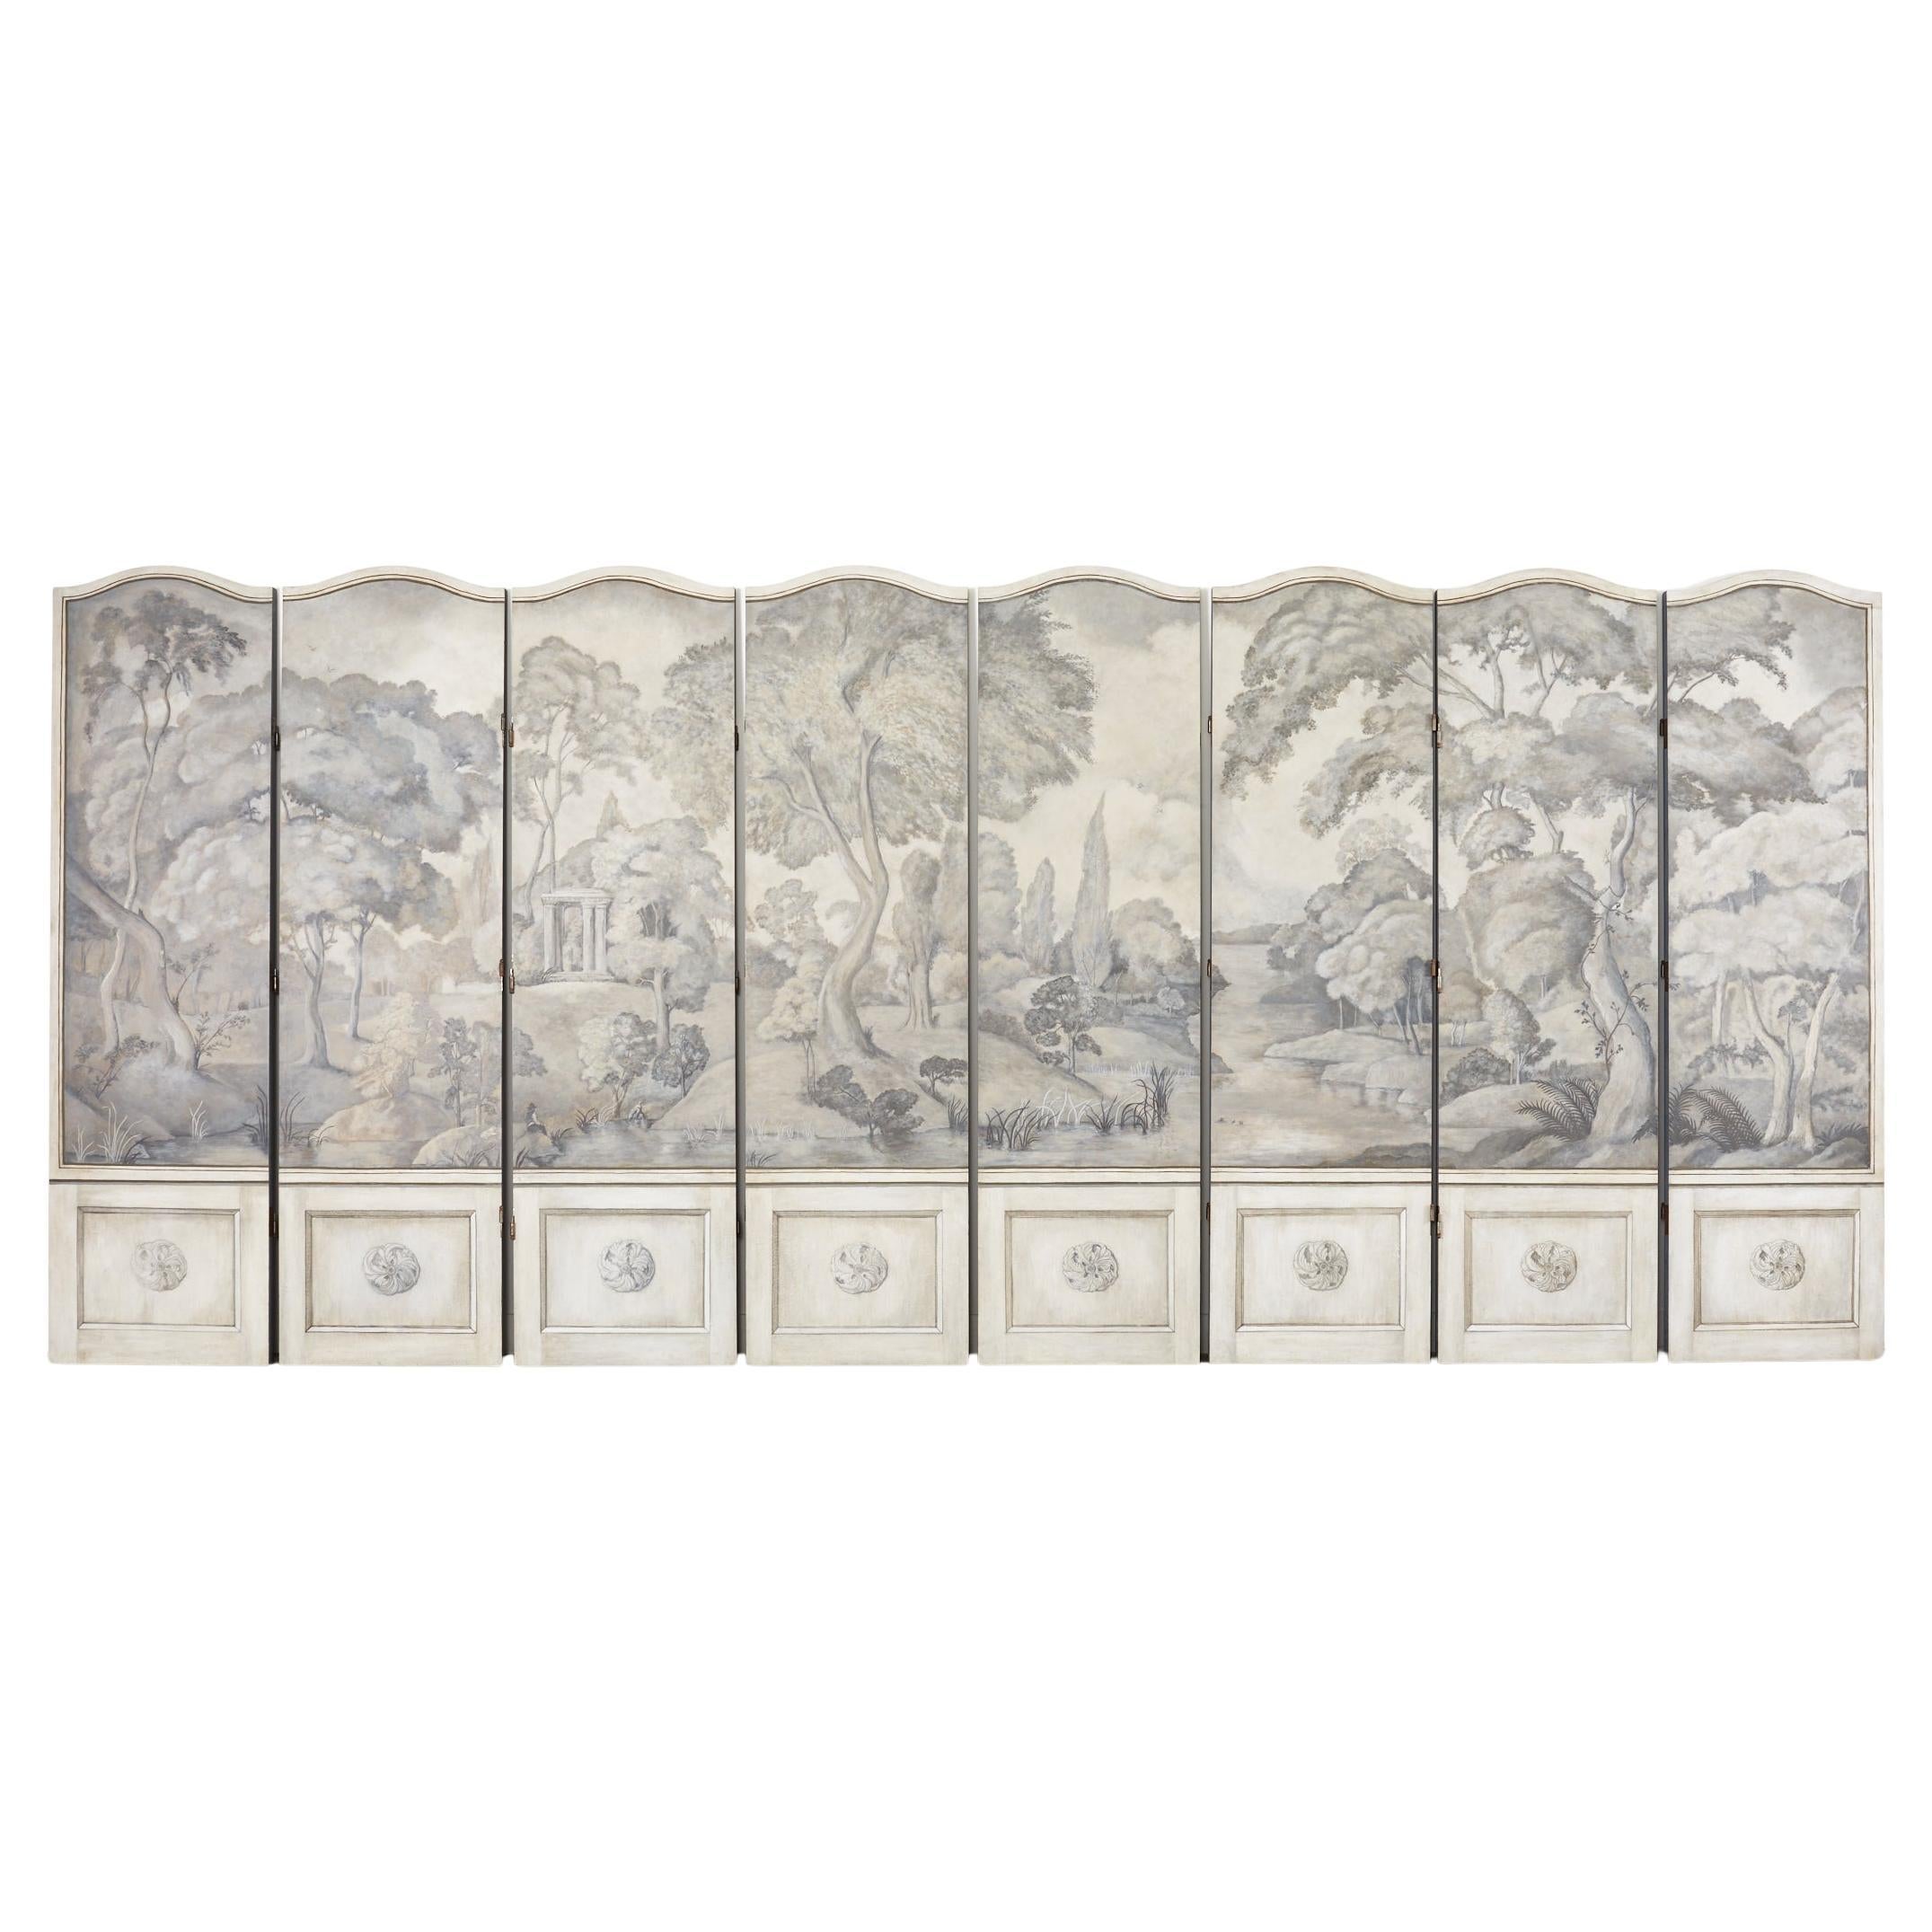 Dennis and Leen Eight Panel Screen Neoclassical Grisaille Landscape For Sale